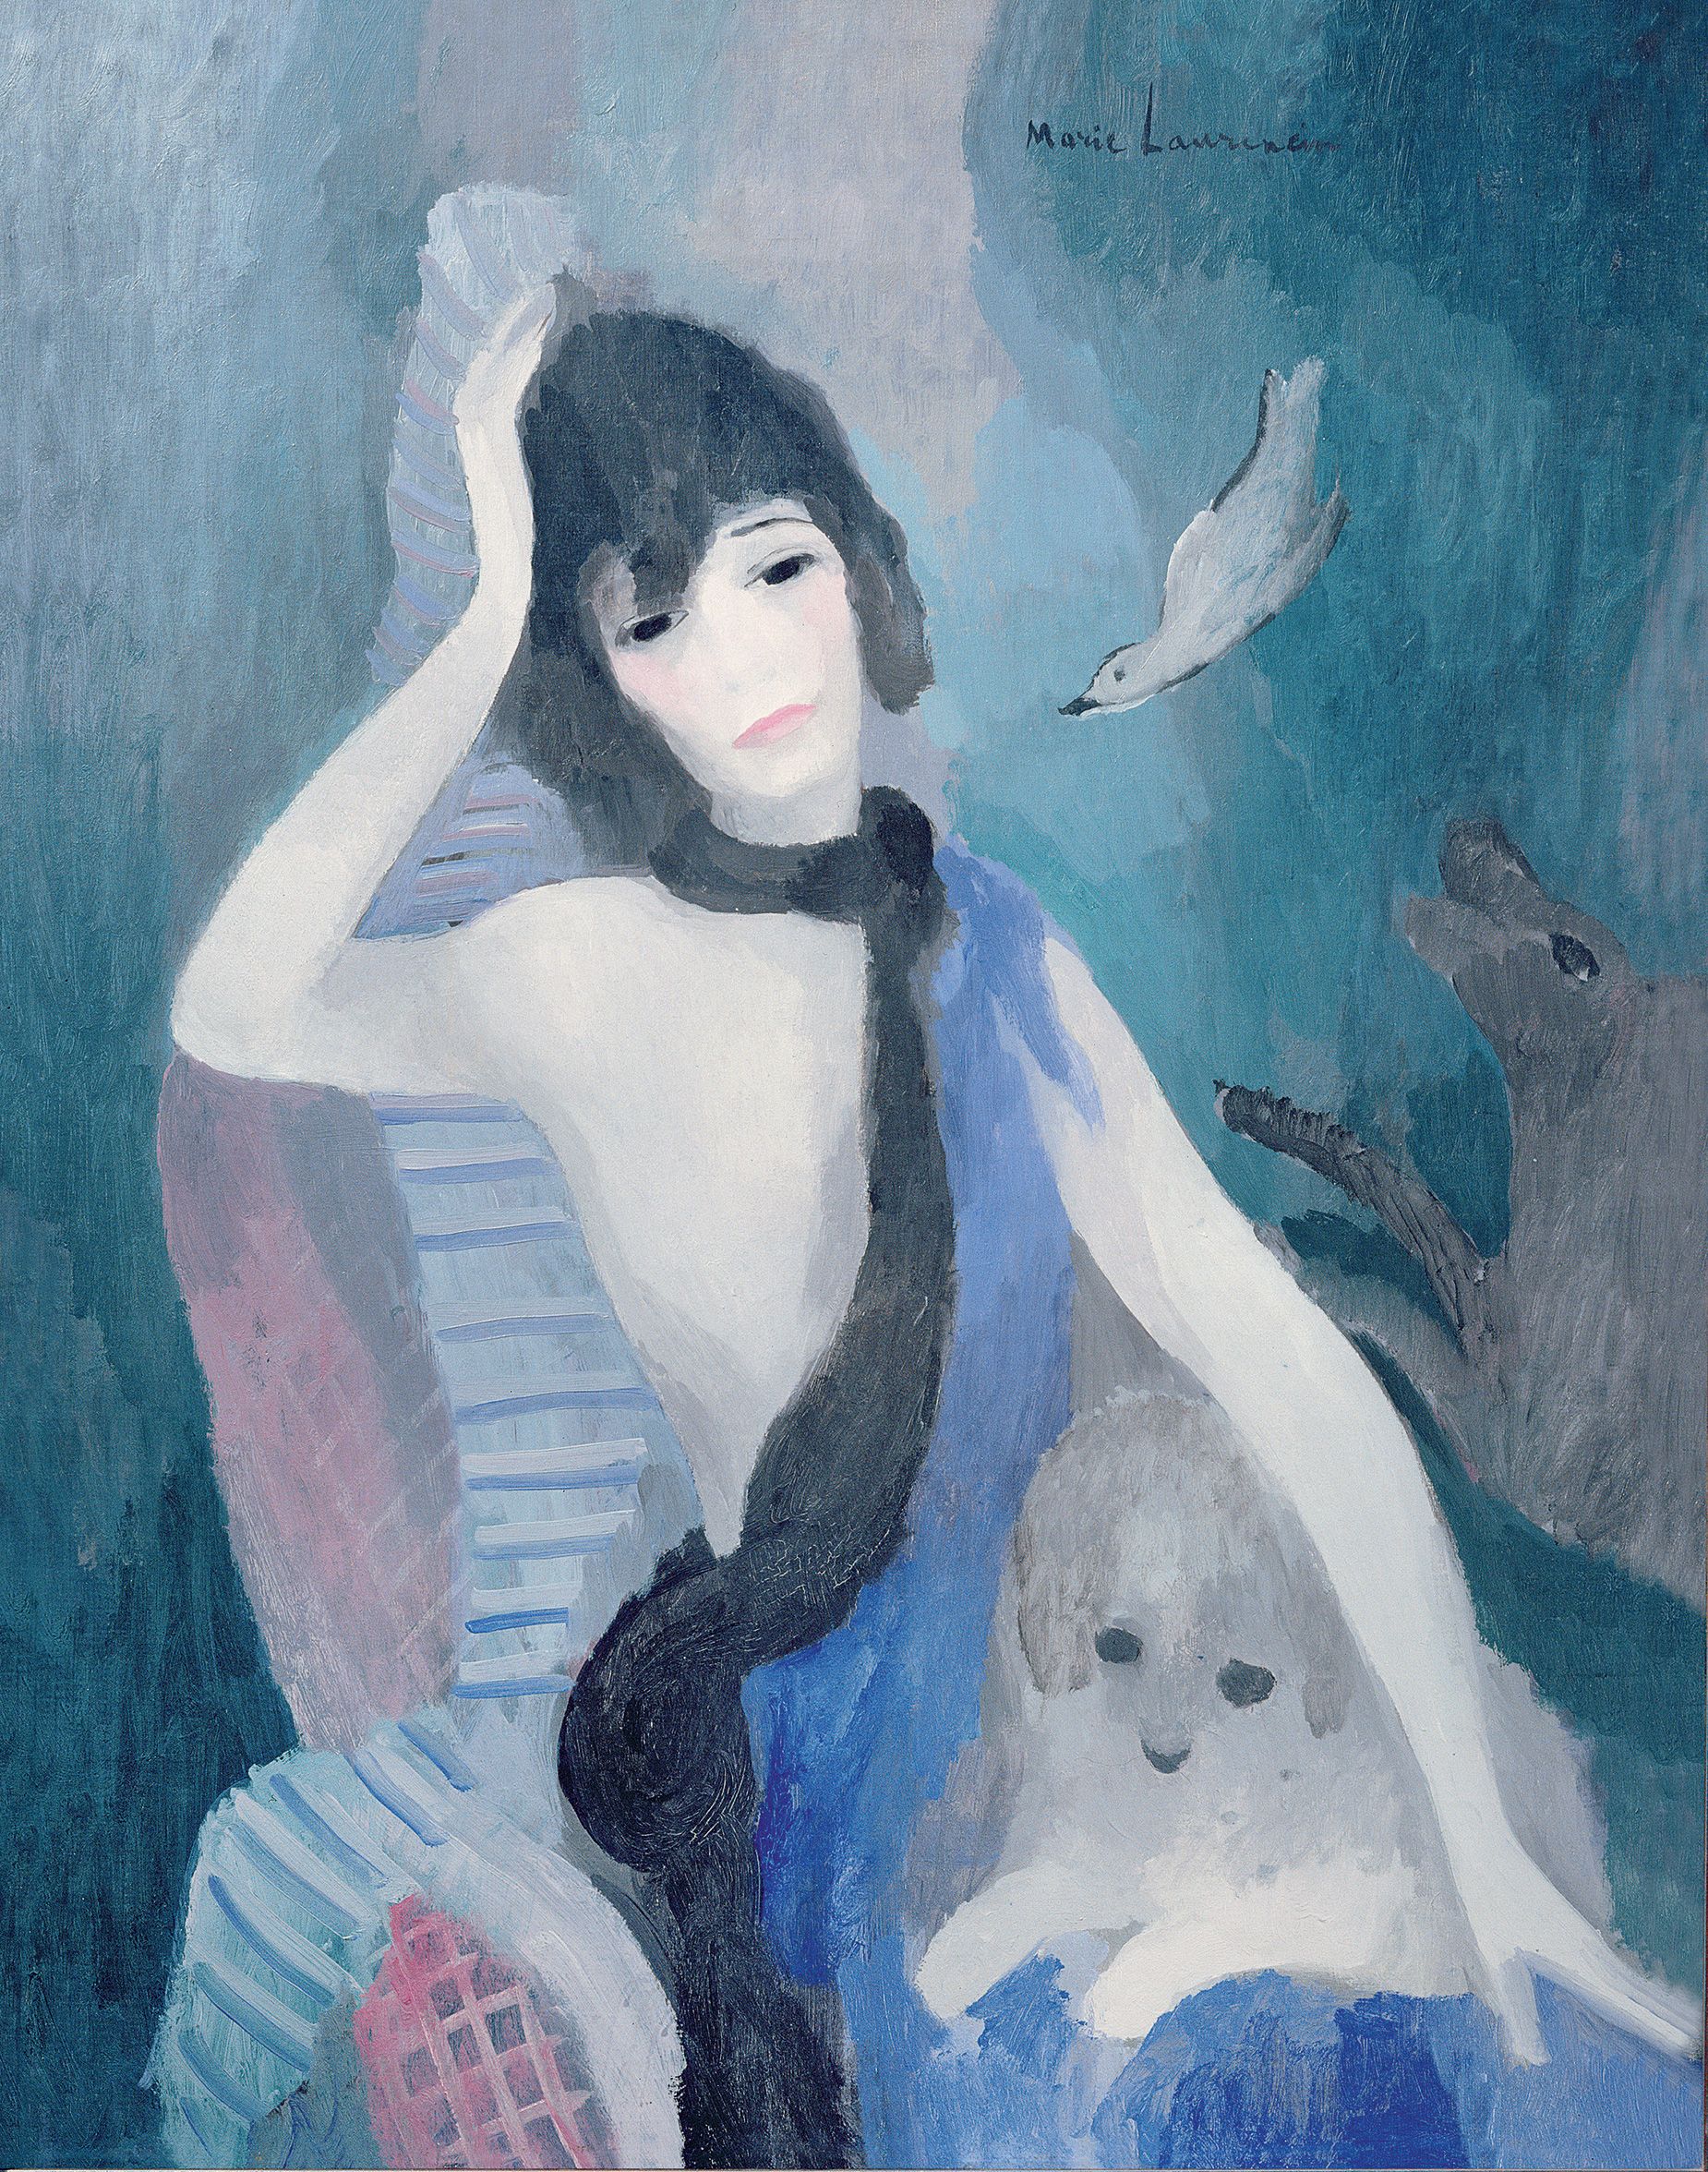 XIR309526 Portrait of Mademoiselle Chanel, 1923 (oil on canvas) by Laurencin, Marie (1883-1956); 92x73 cm; Musee de l\'Orangerie, Paris, France; (add.info.: Coco Chanel, Gabrielle Bonheur (1883-1971); French fashion designer; Haute couture; couturiere;).

Please note: The artwork in this photograph is in copyright. It is your responsibility to ensure this additional copyright is cleared prior to use through the appropriate national collecting society: DACS (UK), ADAGP (France), ARS (USA), SAIE (Italy), VG Bild-Kunst (Germany) or the sister society in your territory.